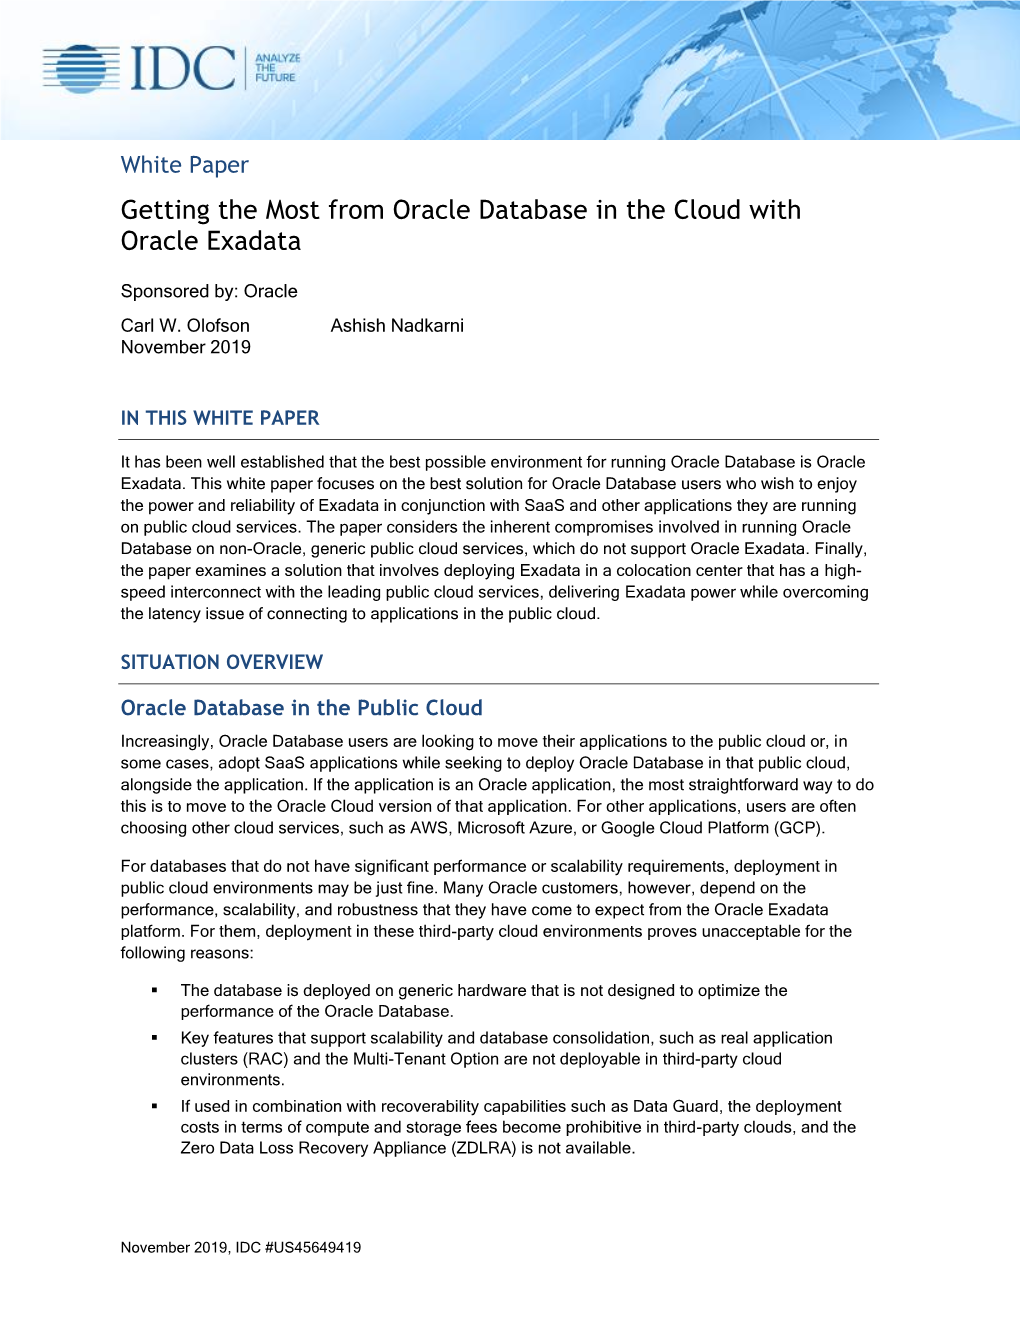 Getting the Most from Oracle Database in the Cloud with Oracle Exadata